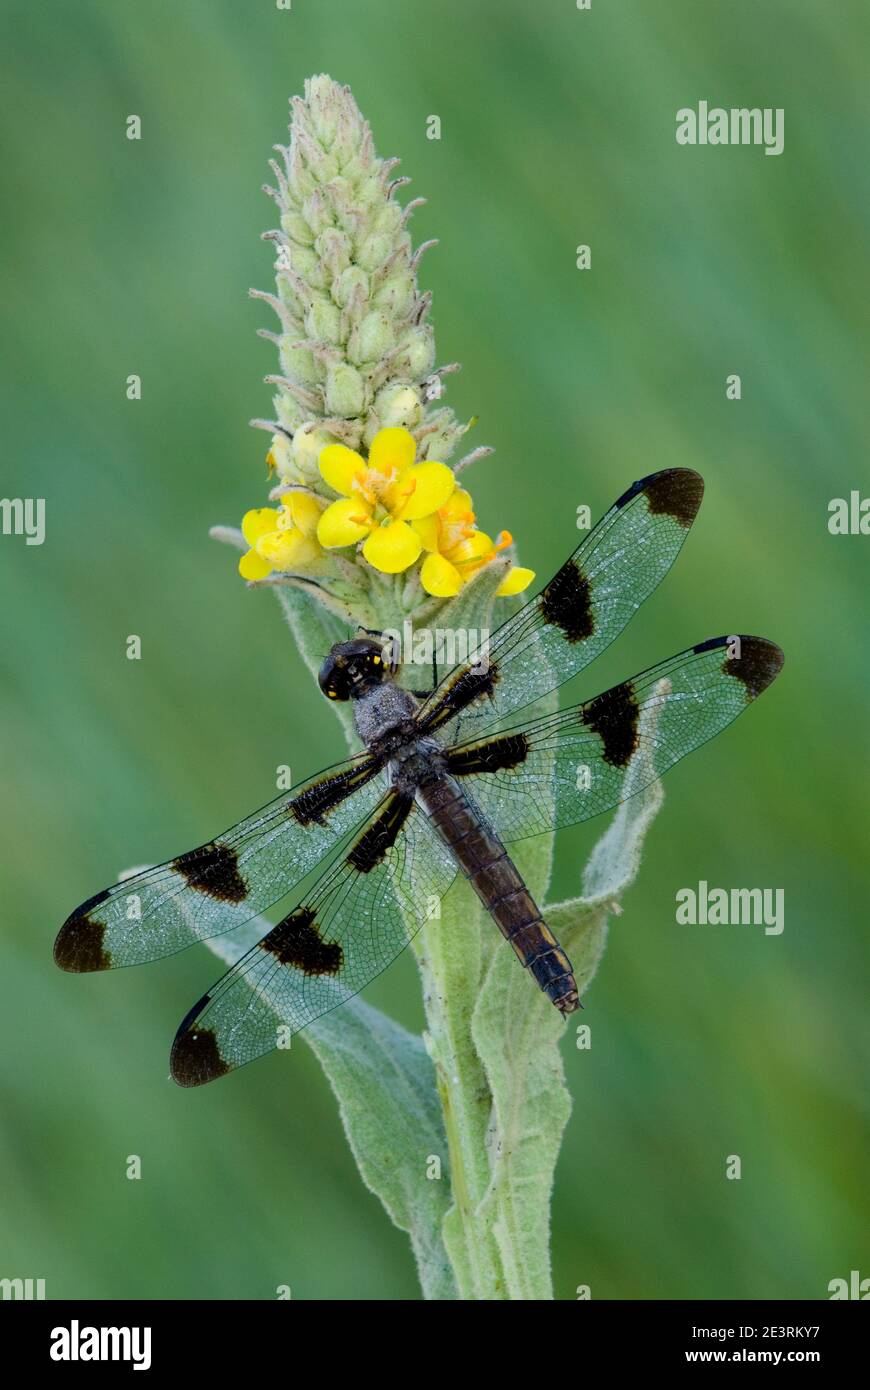 Twelve-spotted skimmer Dragonfly (Libellula pulchella) on Common Mullein (Verbascum thapsus), E USA, by Skip Moody/Dembinsky Photo Assoc Stock Photo